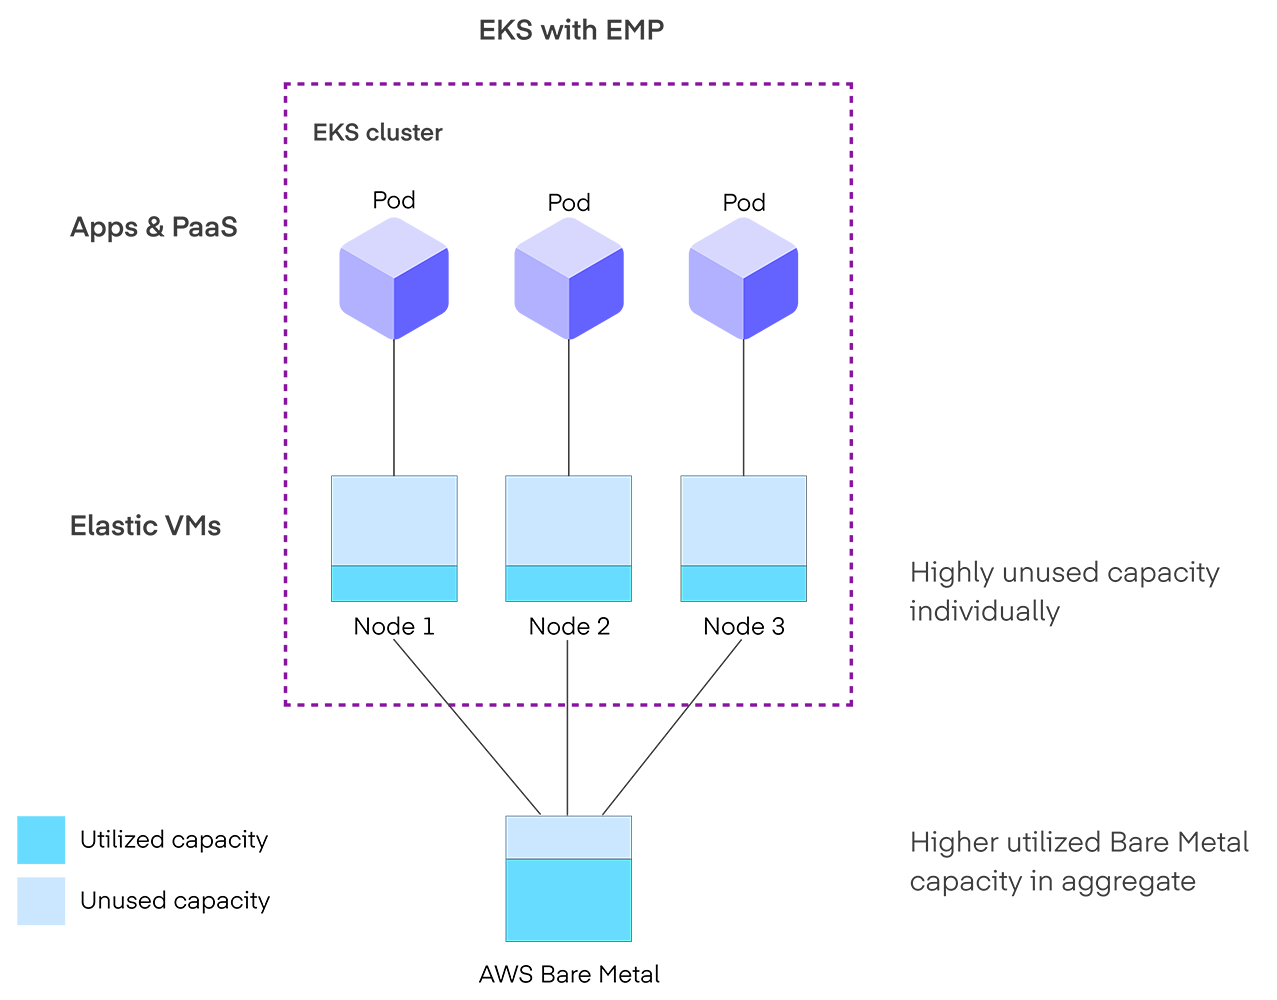 Diagram showing how EMP works to provide higher utilized bare metal capacity in aggregate